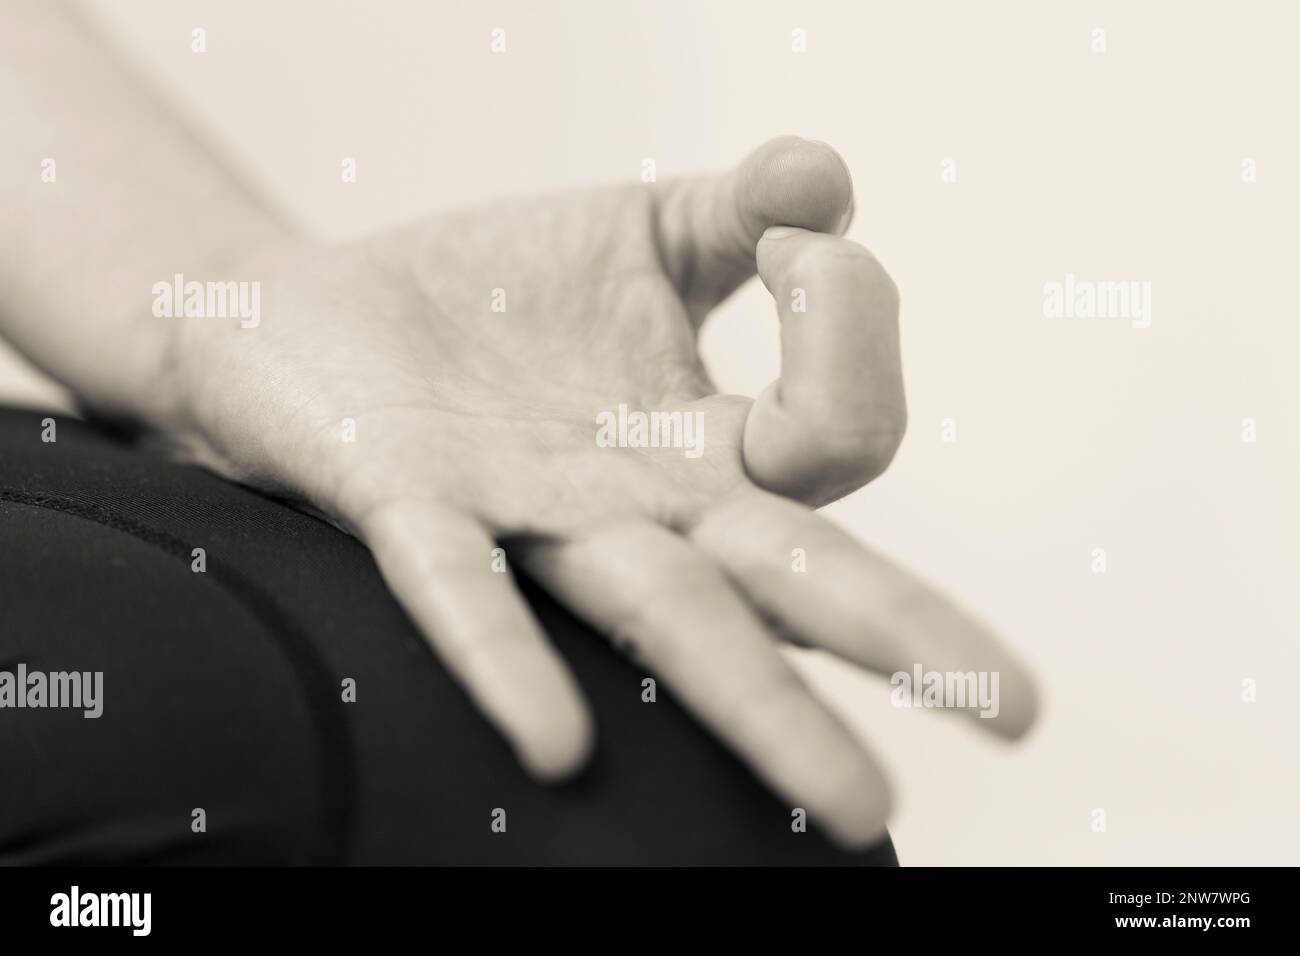 Black and white horizontal closeup of hand gesture or mudra with palm up, directing energy and maintaining focus during meditation. Stock Photo